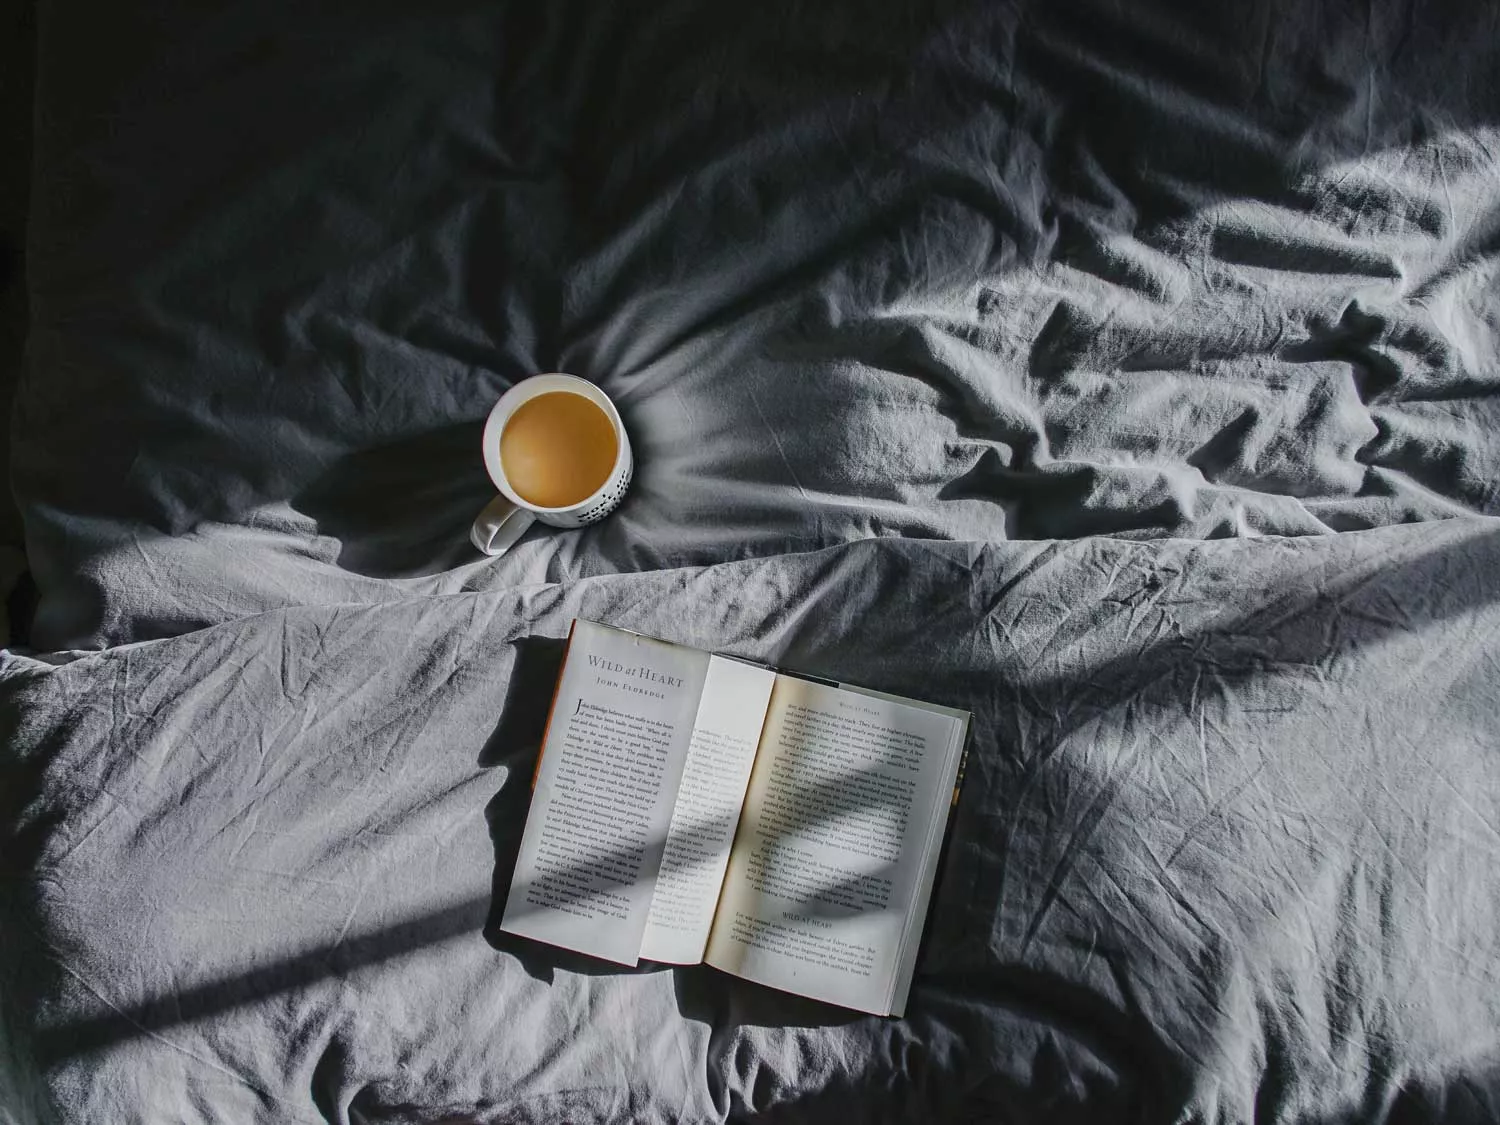 A book and a cup of coffee atop gray sheets.